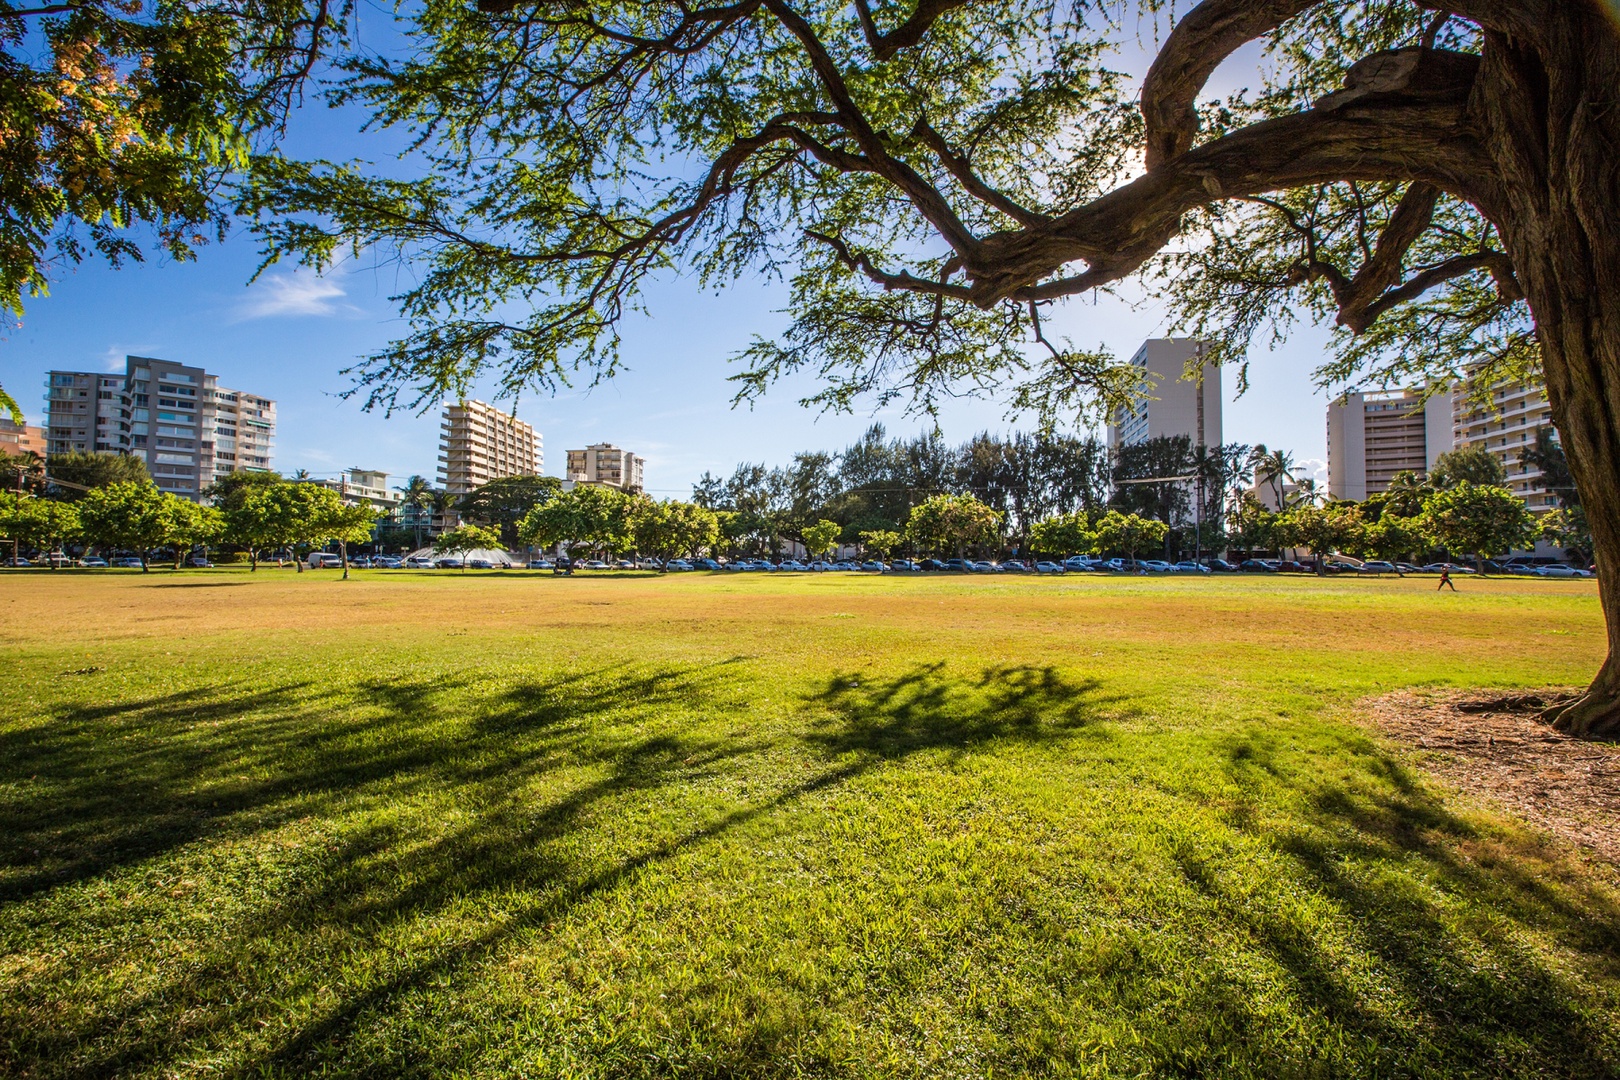 Honolulu Vacation Rentals, Hale Mahie - Not only will you be steps to the beach but you are also steps to Kapiolani Park, where you can head out for a picnic, play some kickball, or enjoy a run around the loop.